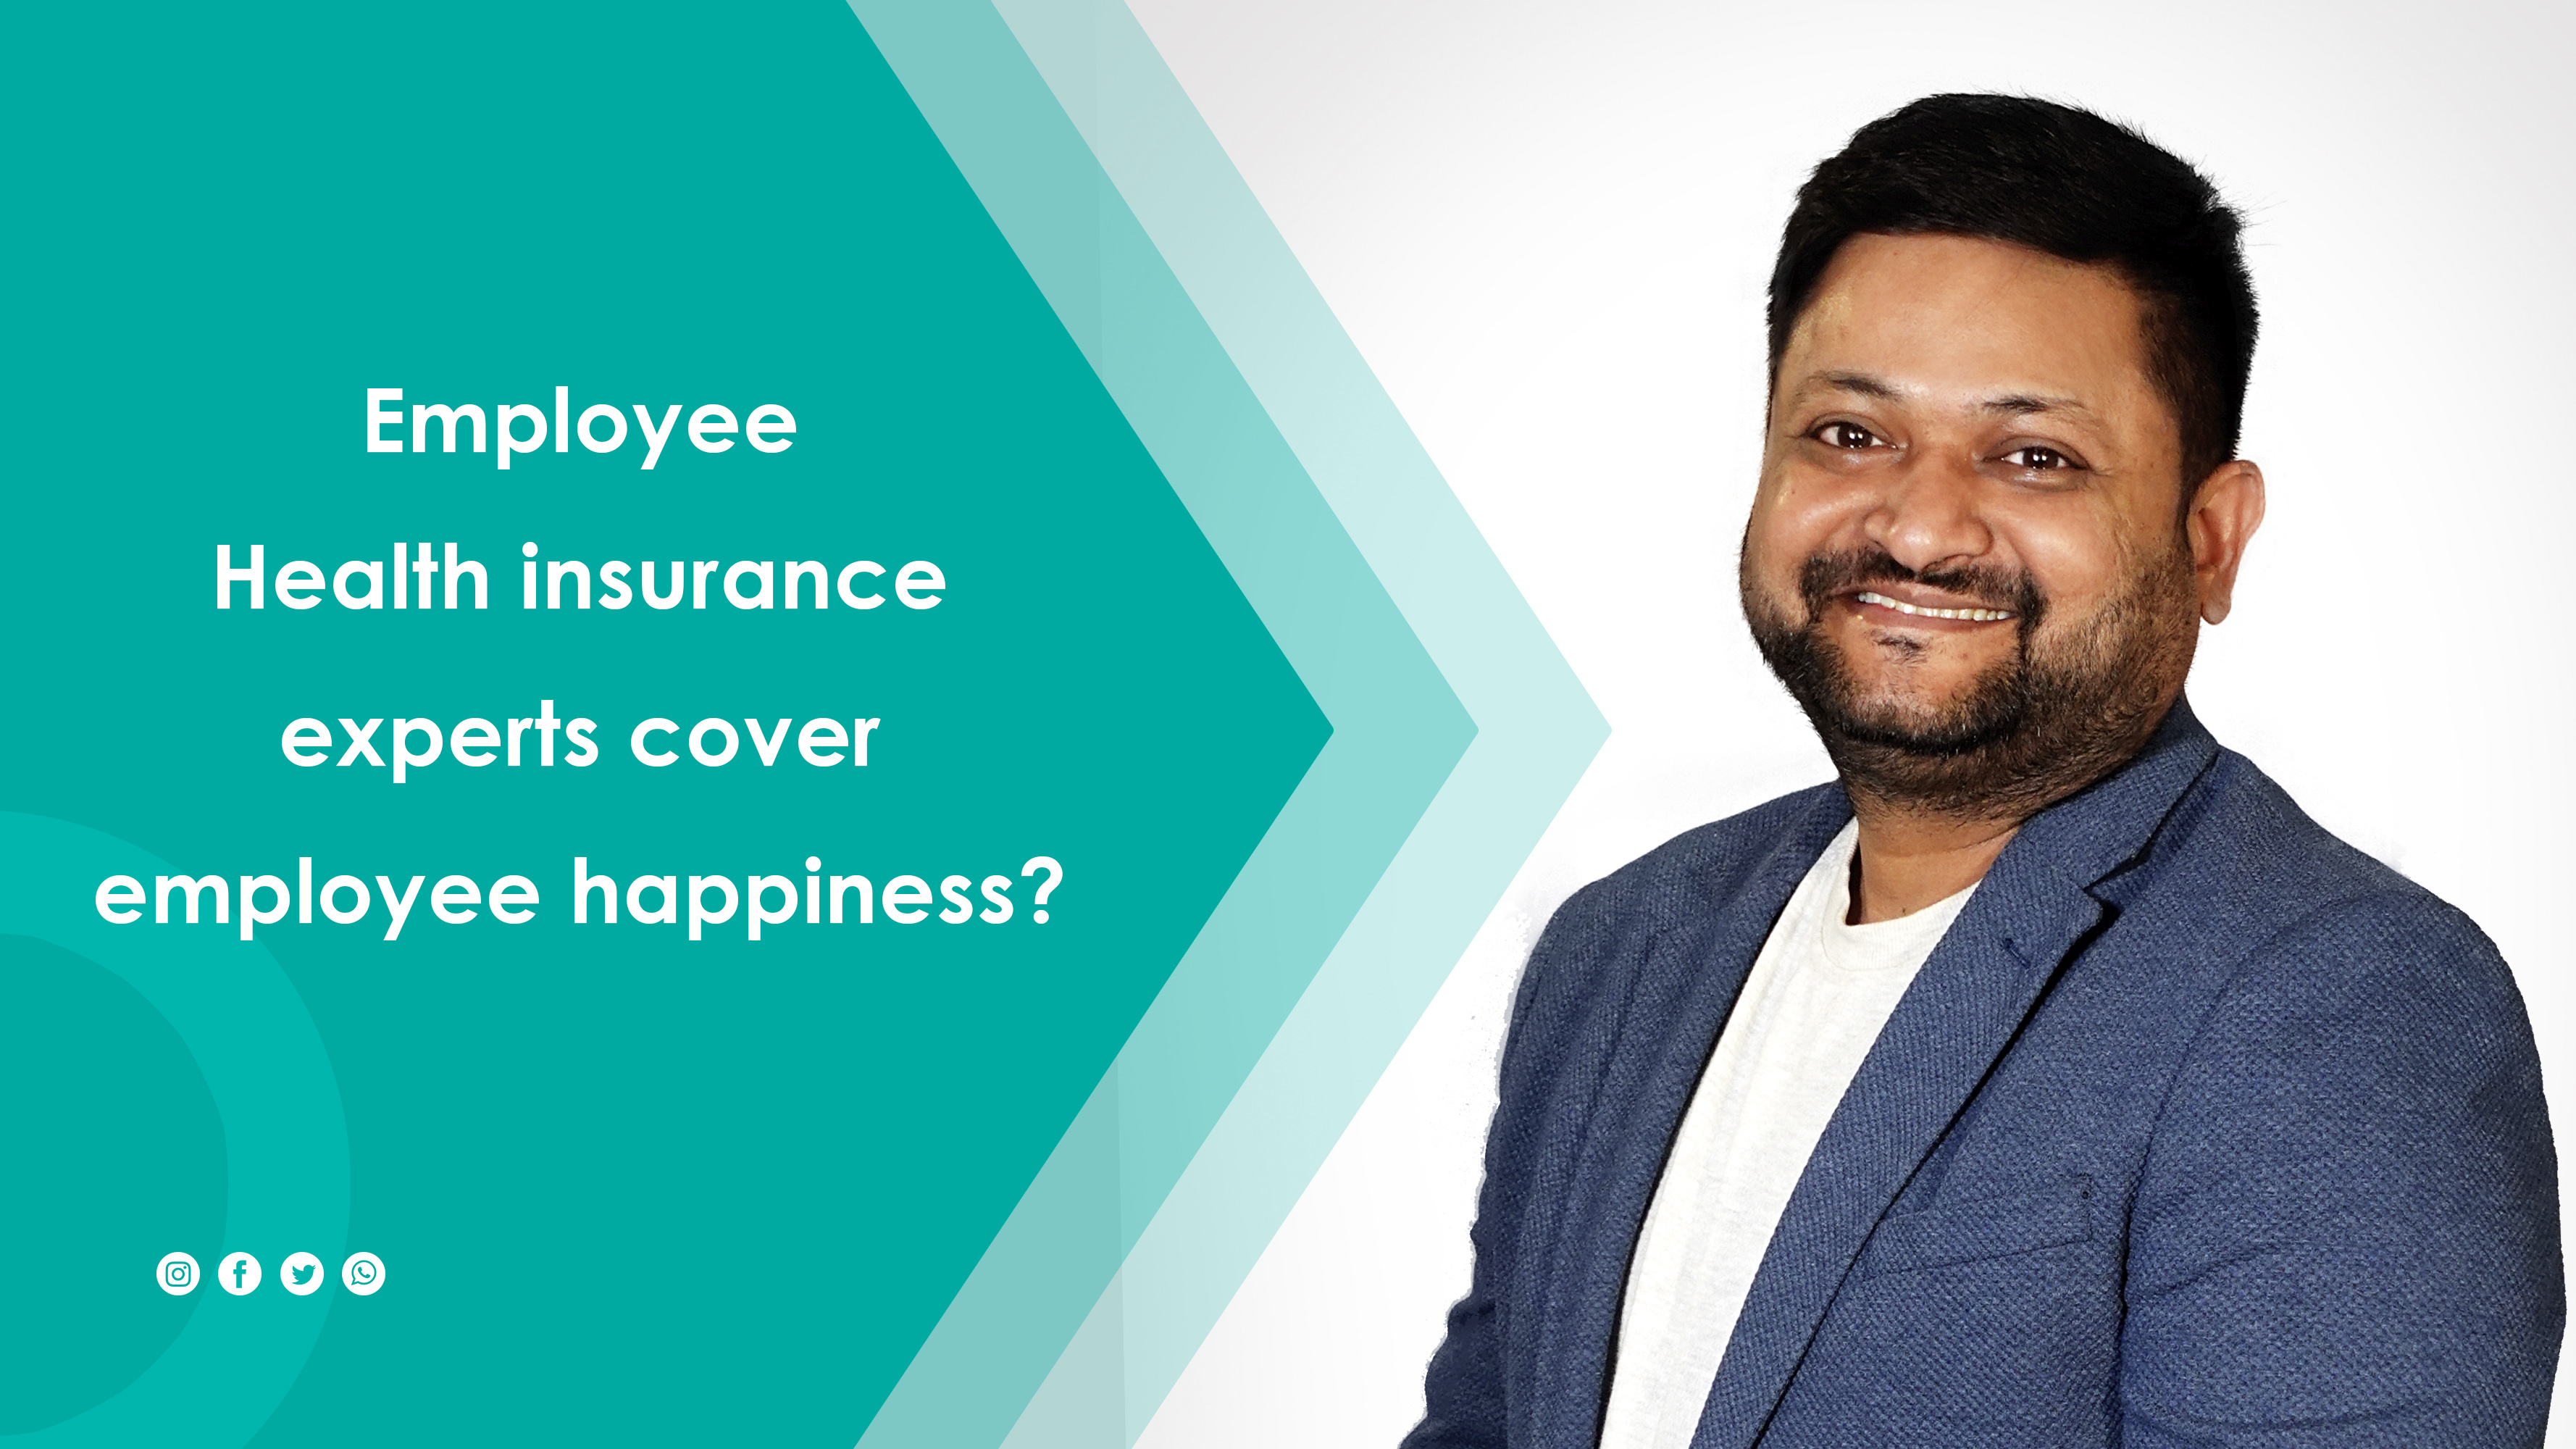 Employee Health insurance experts cover employee happiness? - Video cover image having Susheel Agarwal